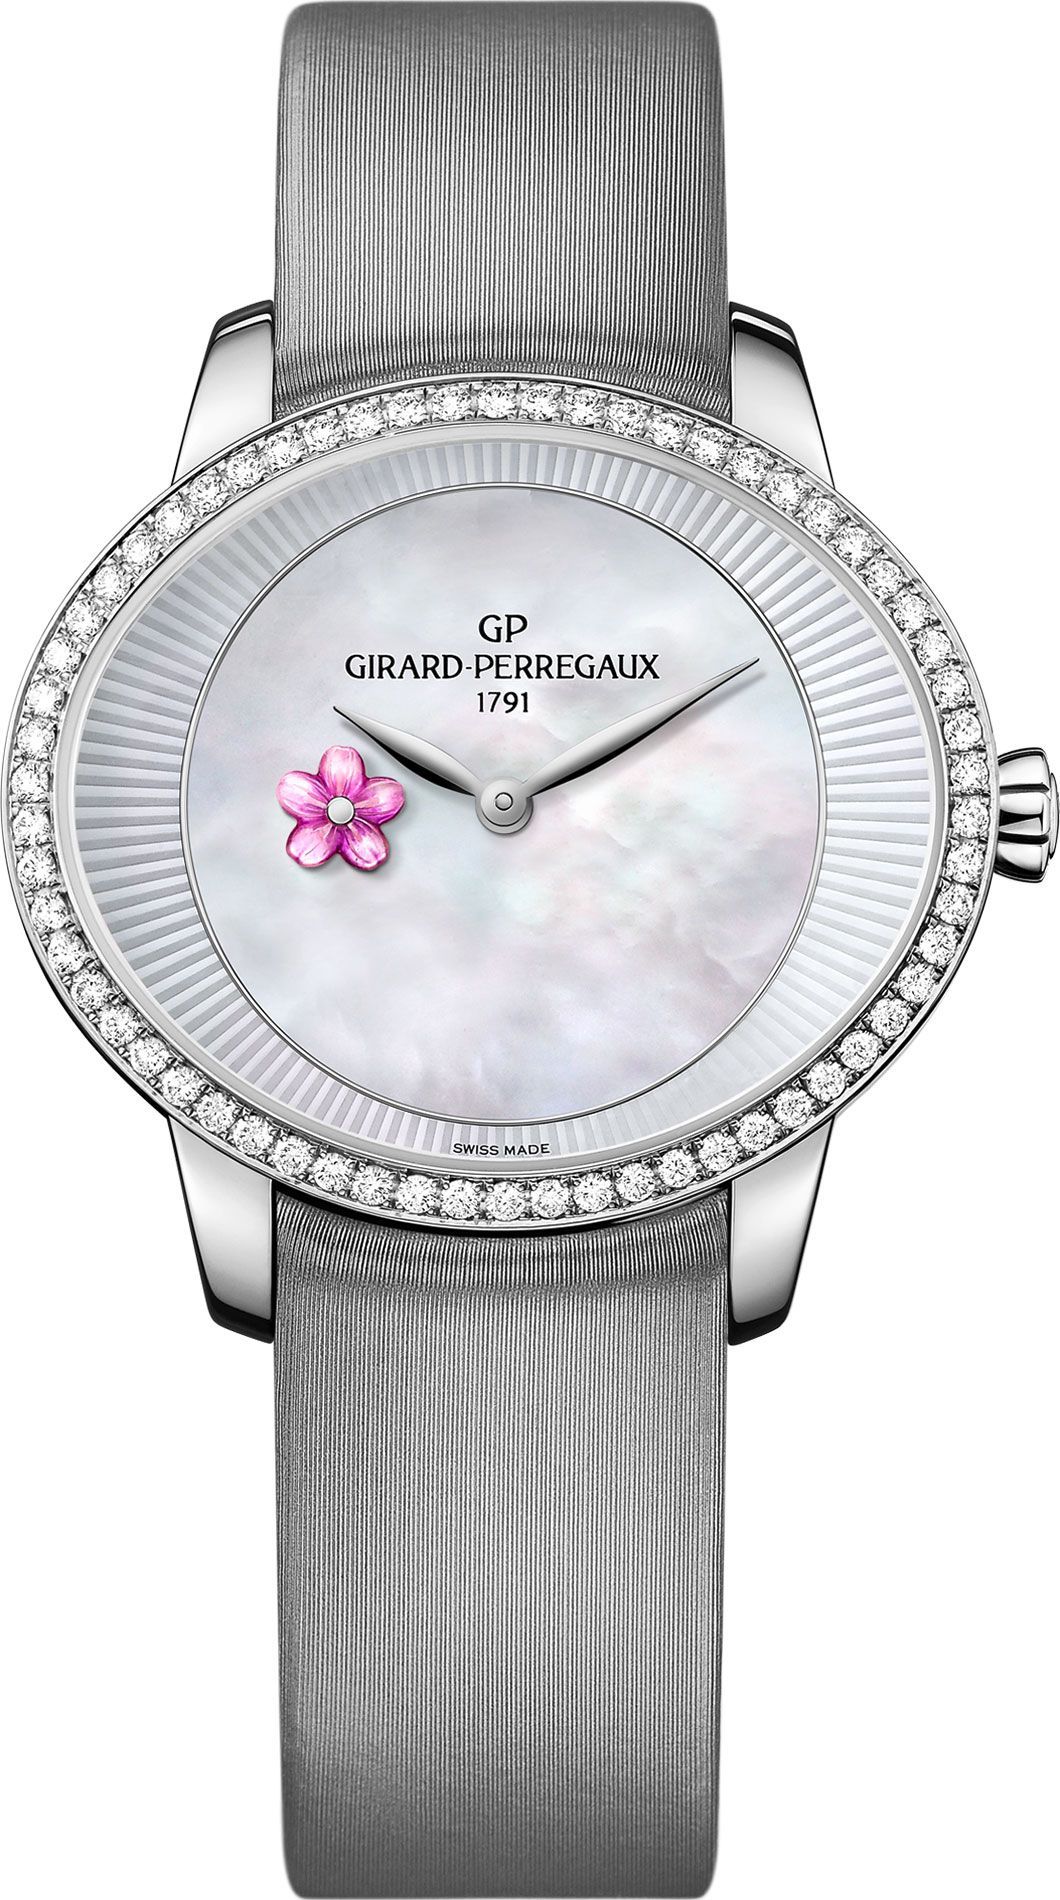 Girard-Perregaux Small Seconds 35.40 mm Watch in MOP Dial For Women - 1